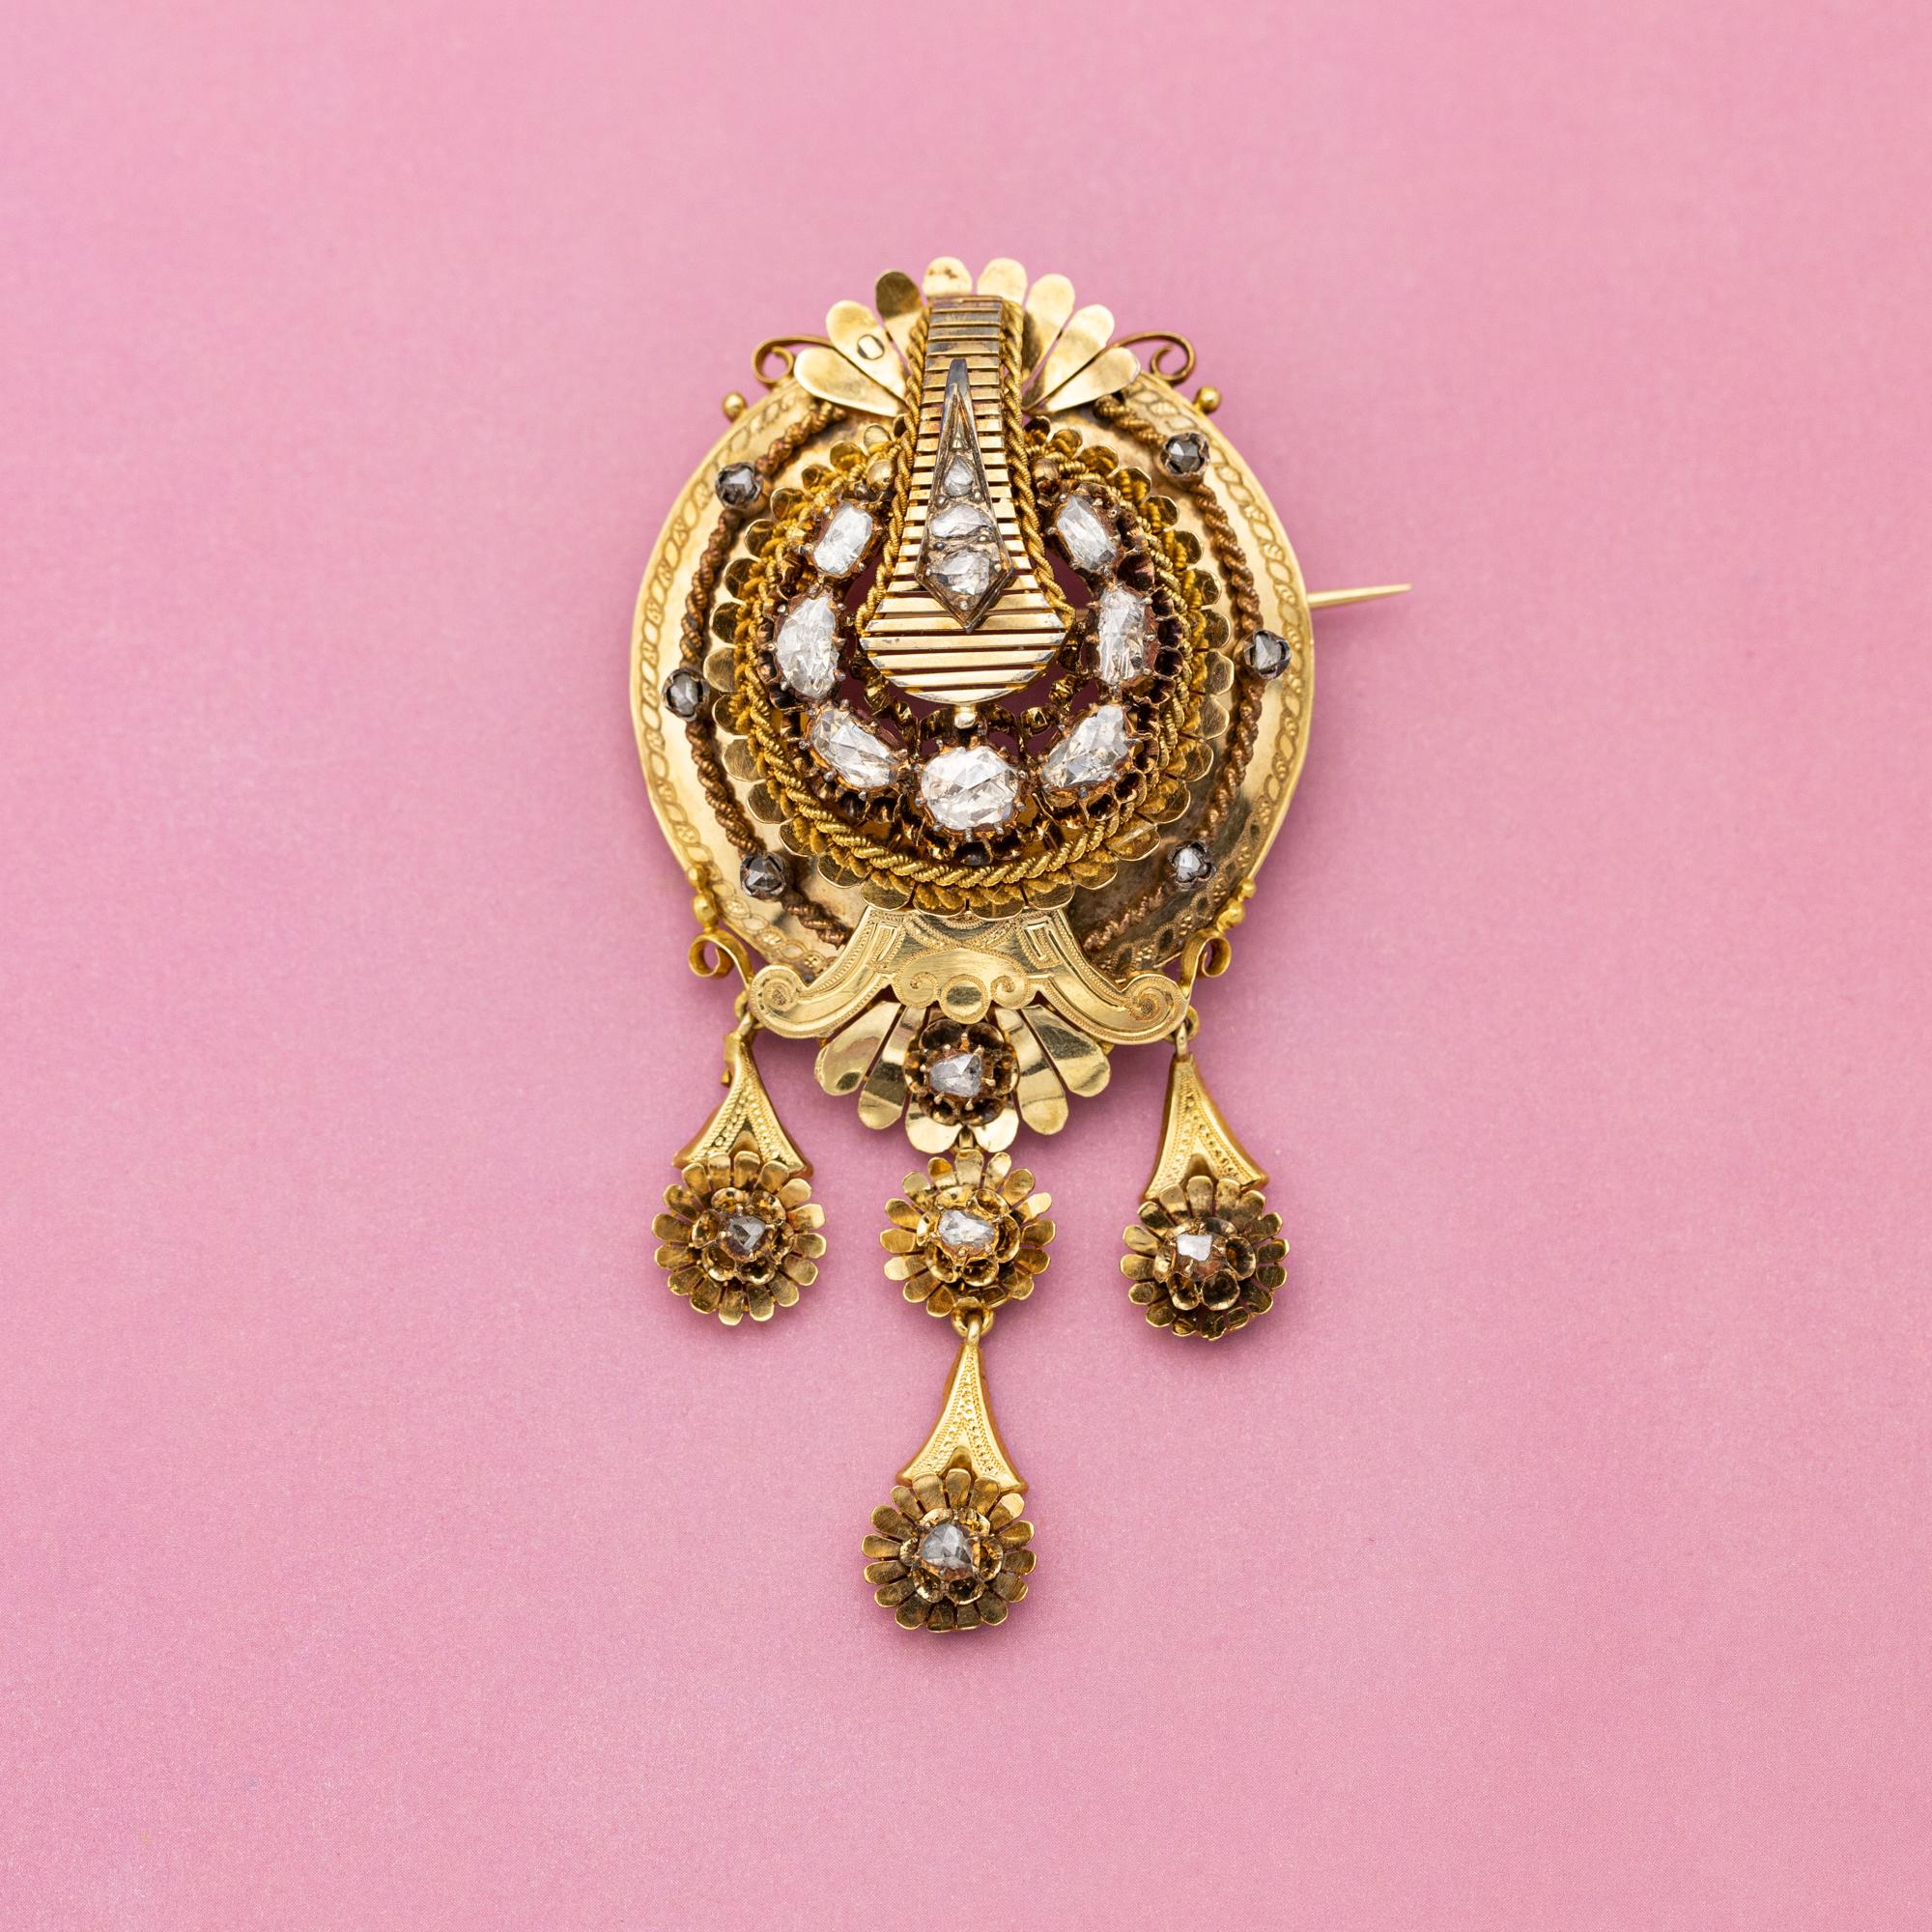 18ct yellow gold Victorian brooch - Large and heavy foiled back diamond heirloom For Sale 13